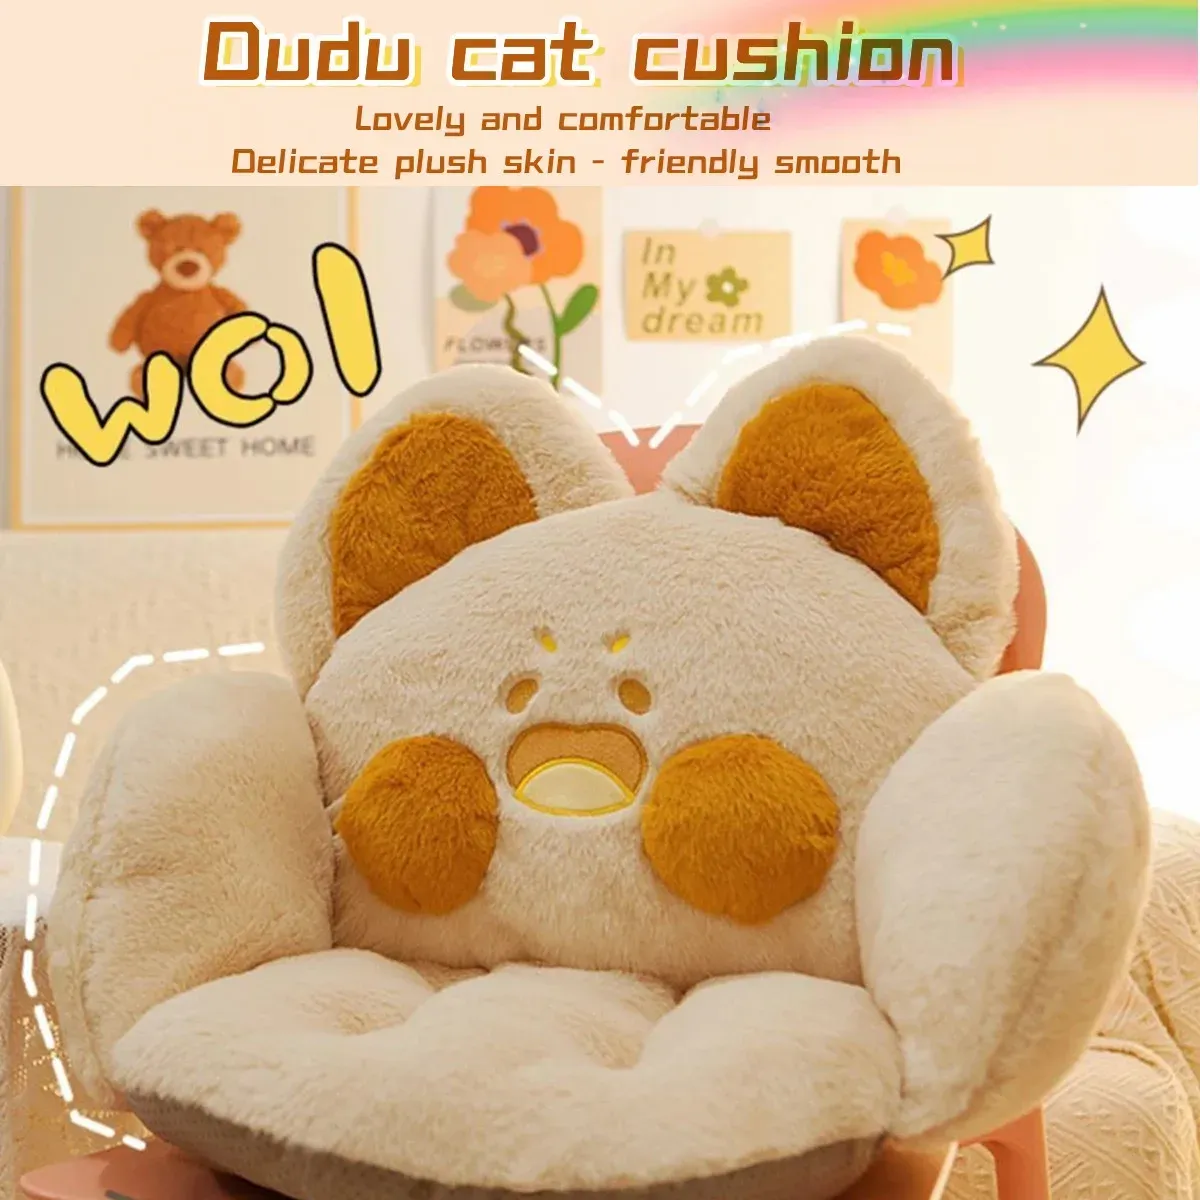 Pillow DUDU Cat Cushion Pillow,Comfy Kawaii Chair Cushion,Necessary For Office And Bedroom,Single Seat Back,Home Decor Plush Seat Pads.